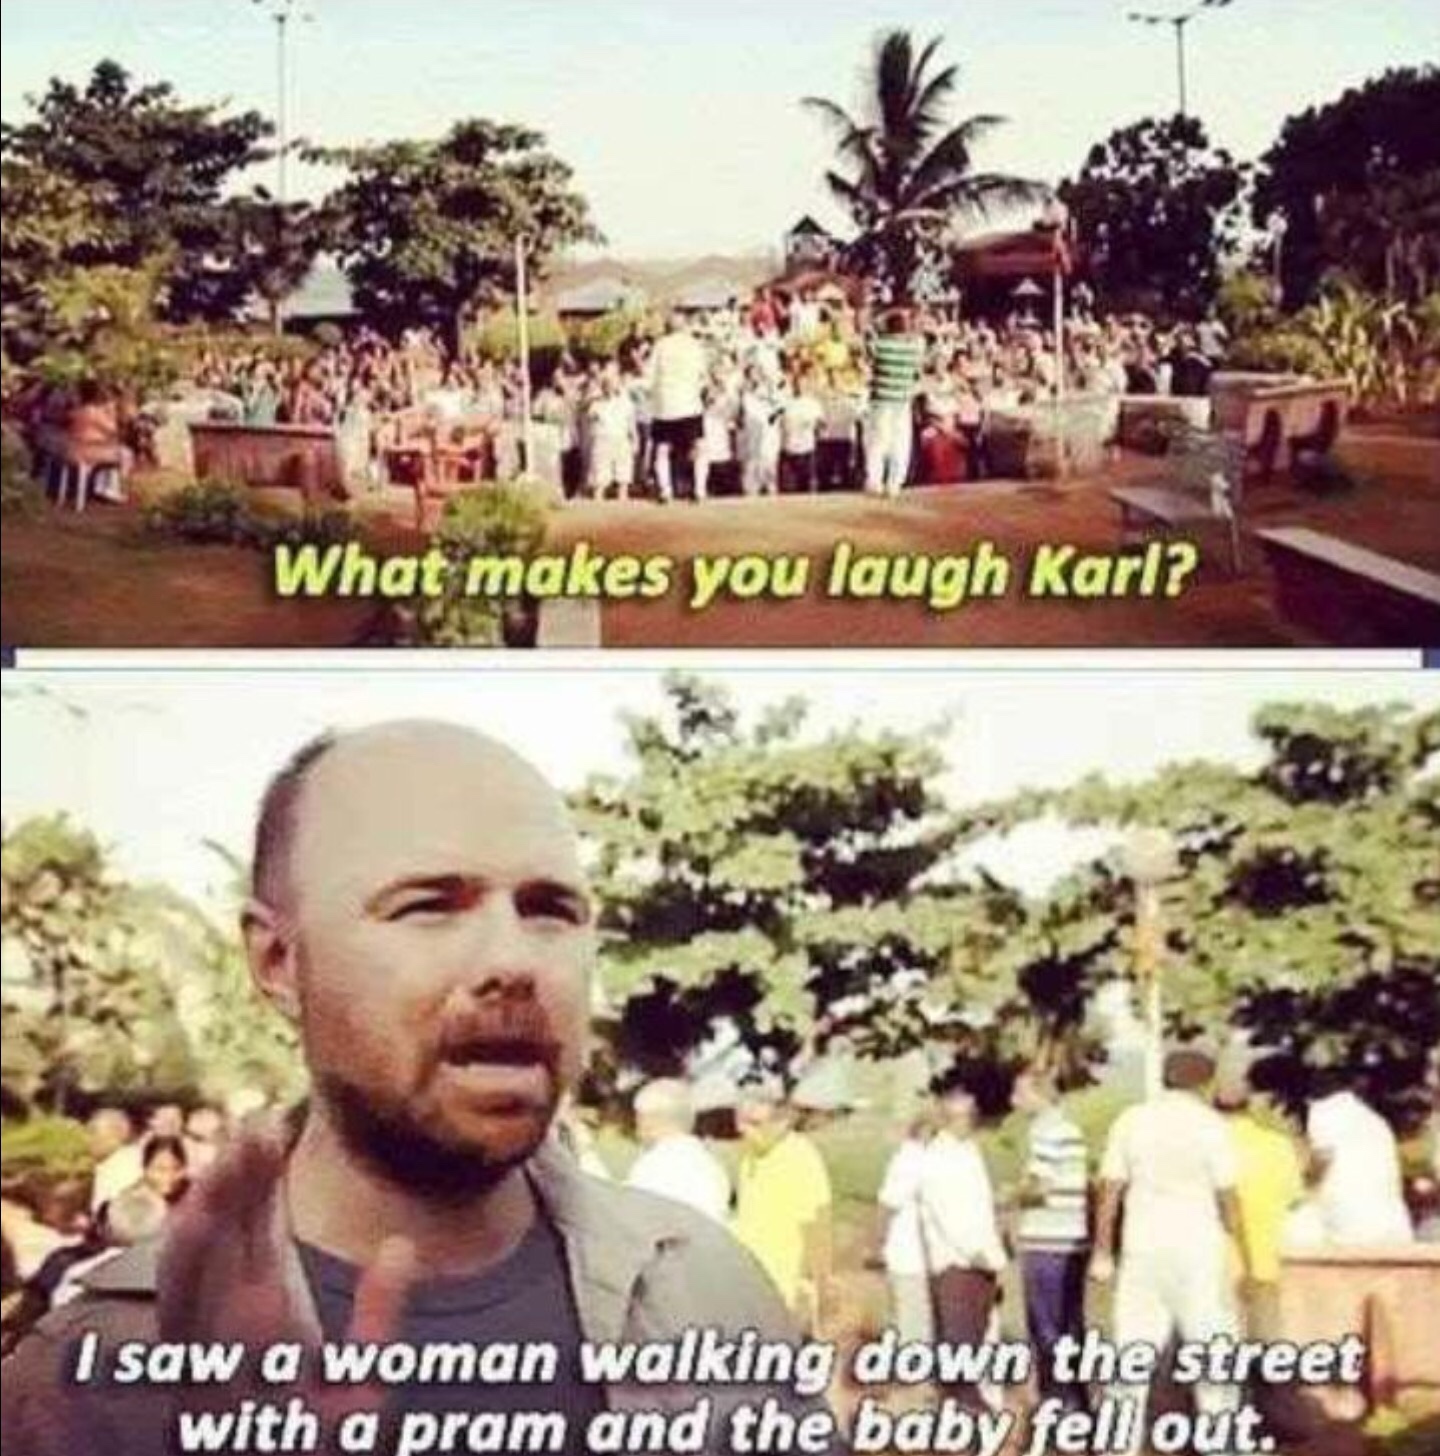 showerthoughts   - makes you laugh karl - What makes you laugh Karl? I saw a woman walking down the street with a pram and the baby fell out.